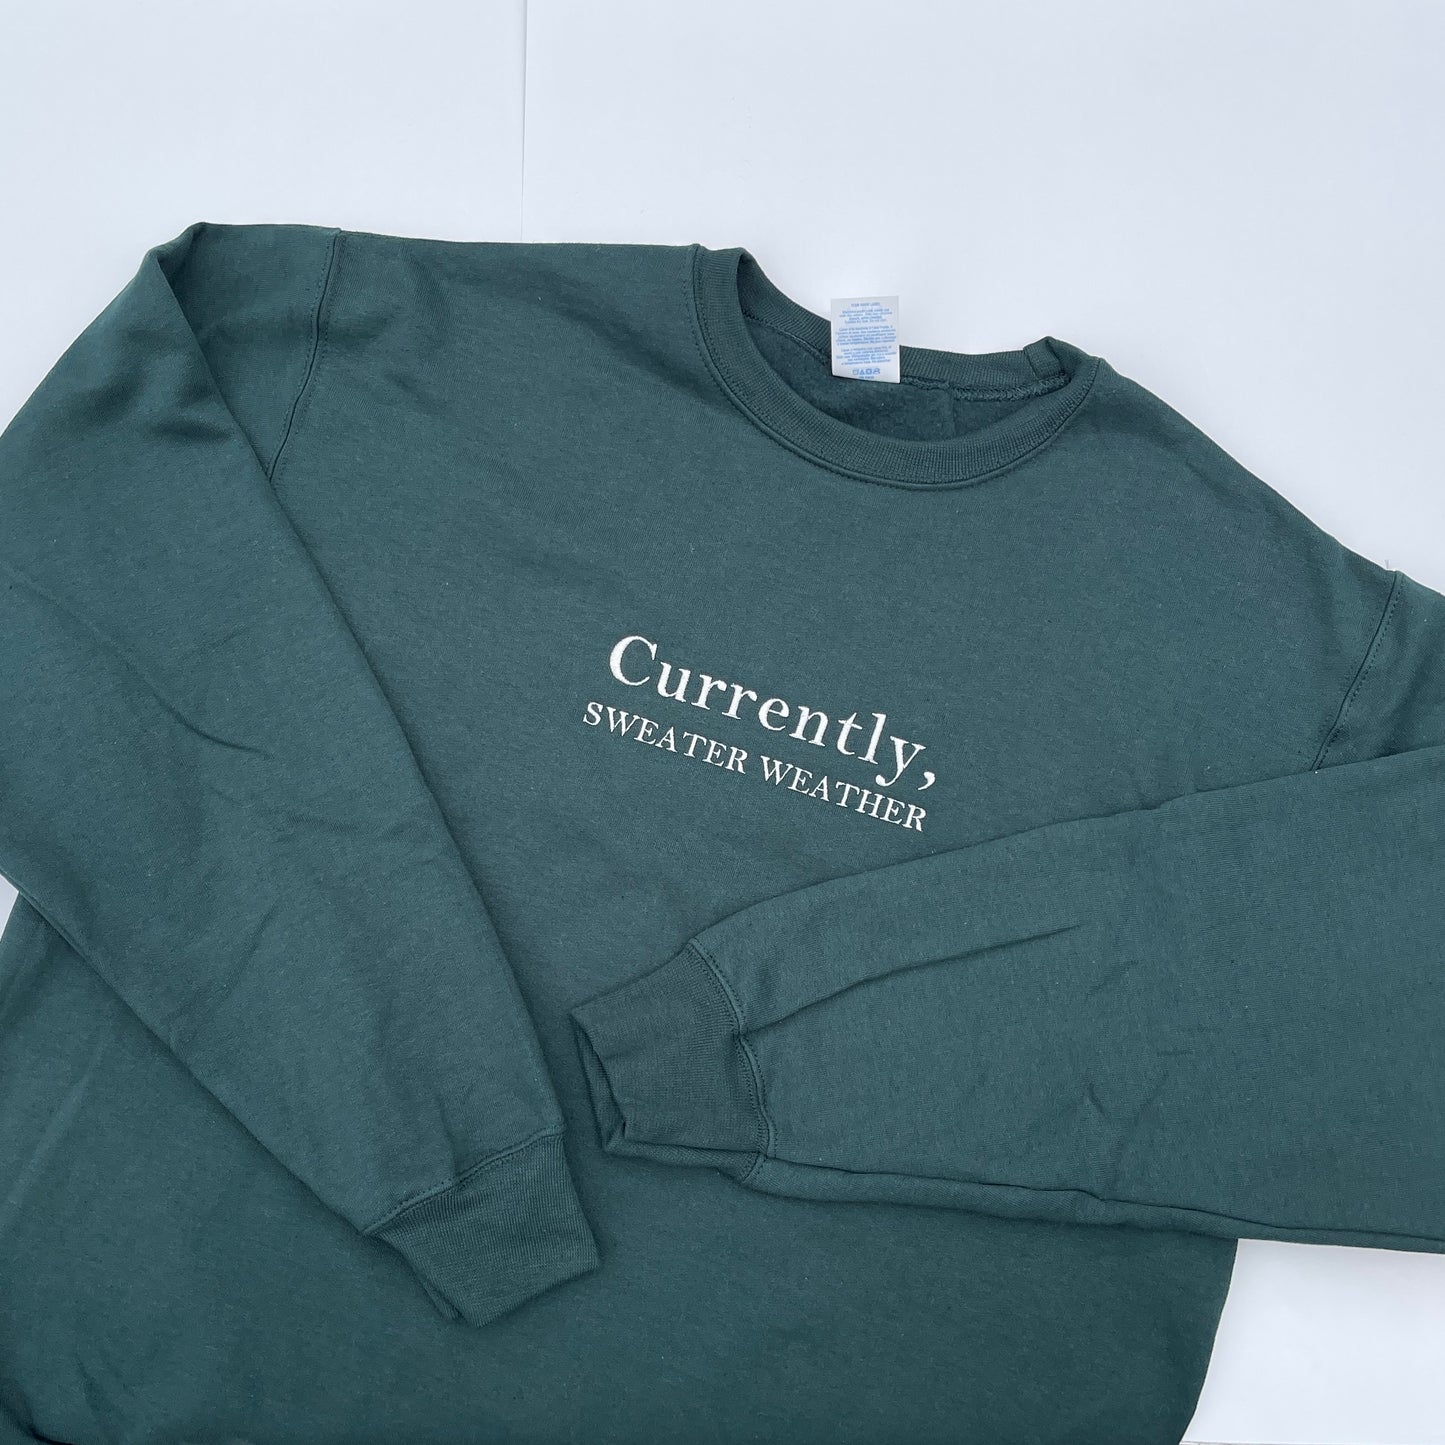 Currently, Sweater Weather Embroidered Sweatshirt